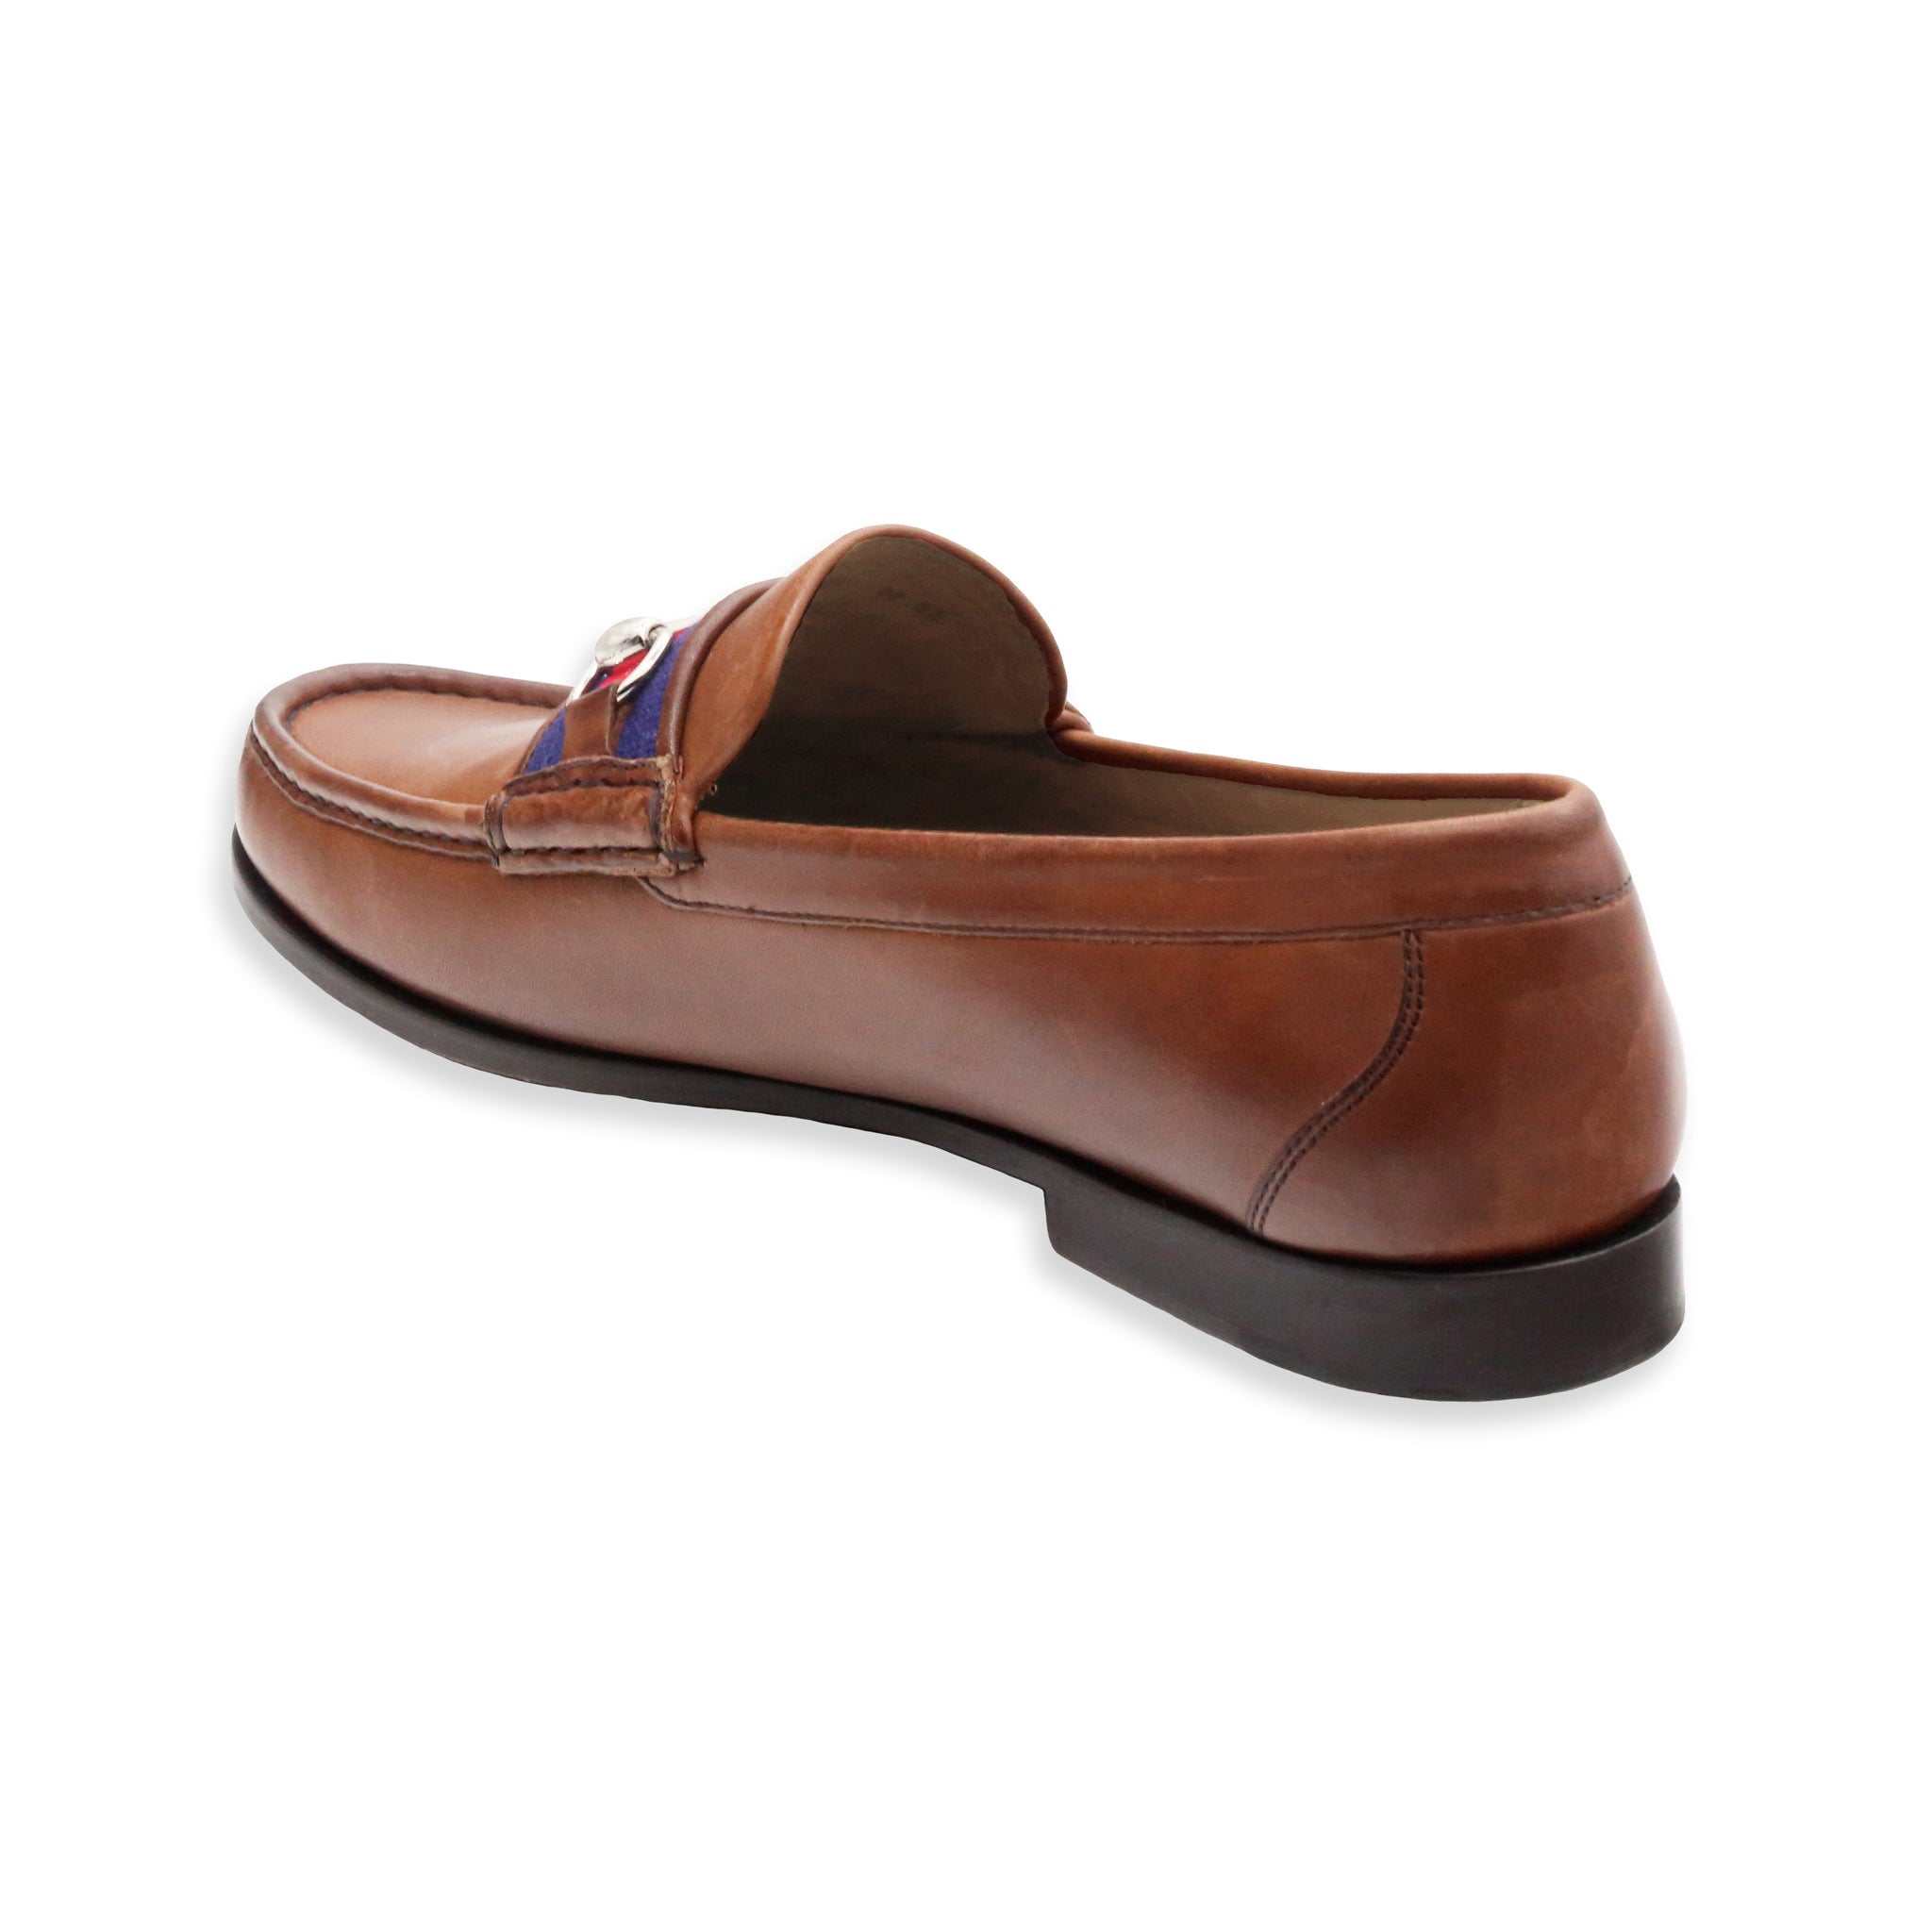 Surcingle Downing Bit Loafers (Dark Navy-Forest) (Chestnut Leather)